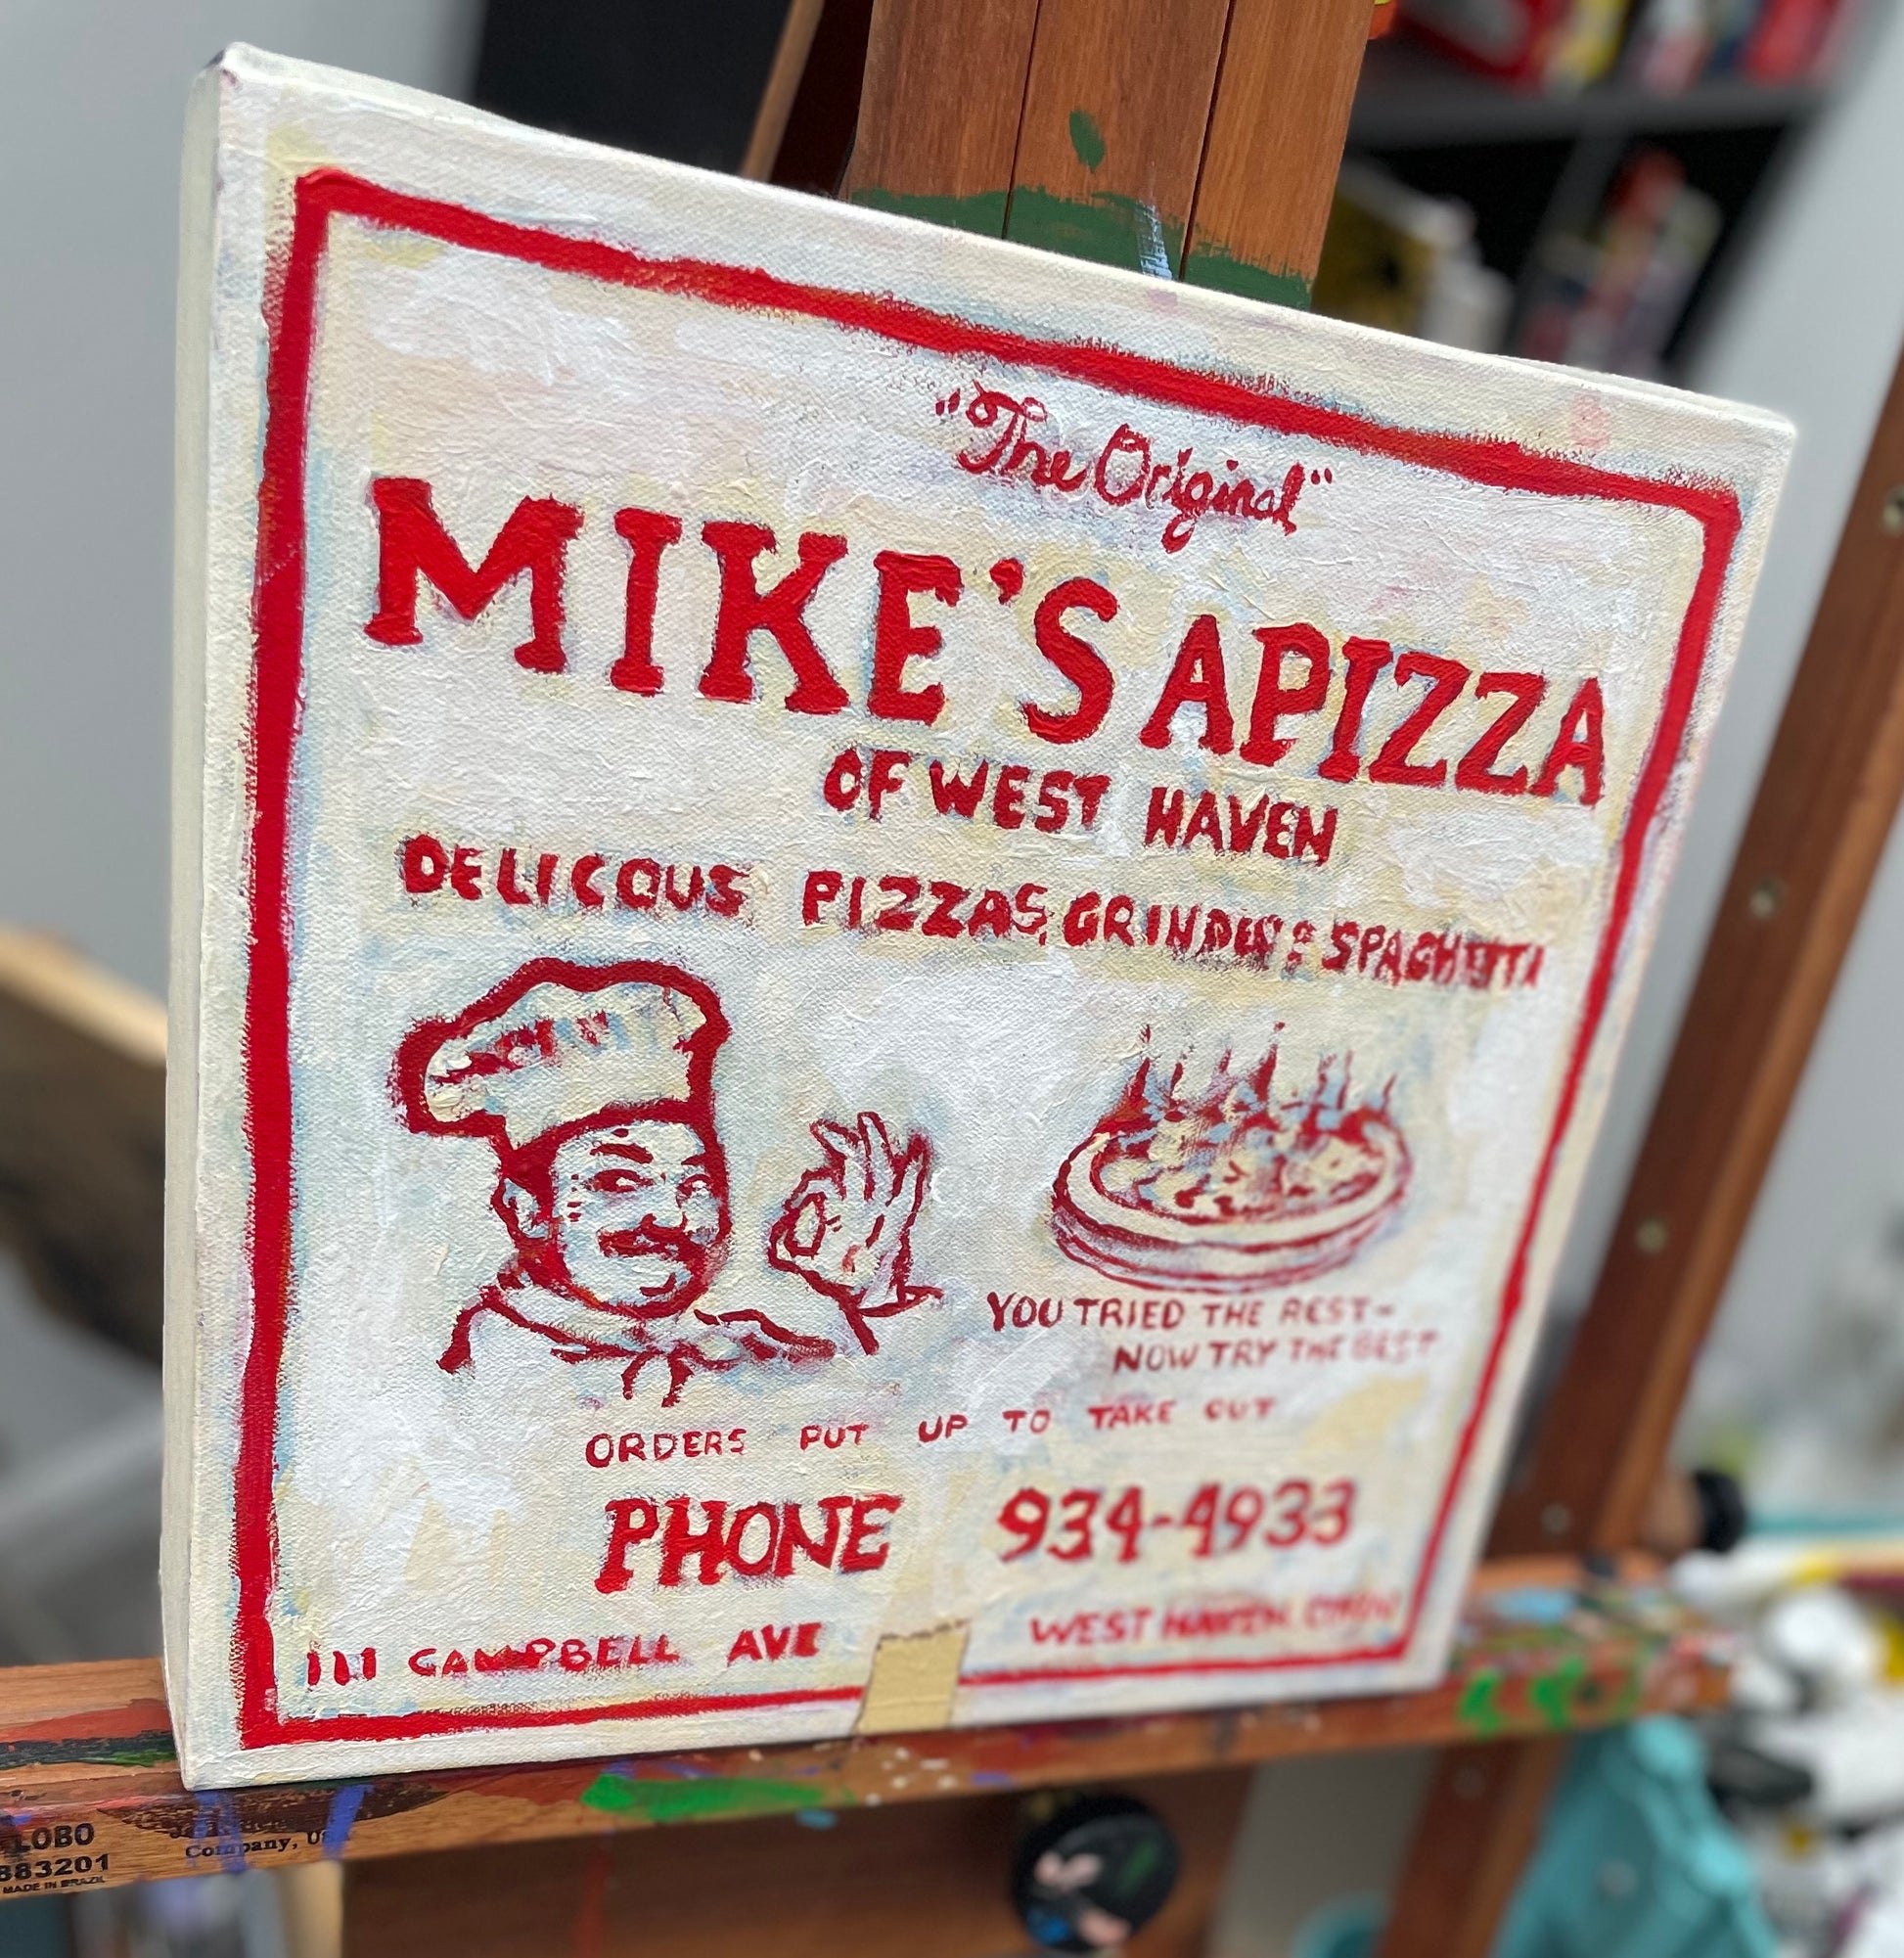 Pizza Box Painted Portrait—commission art inspired by your favorite pizza  shop